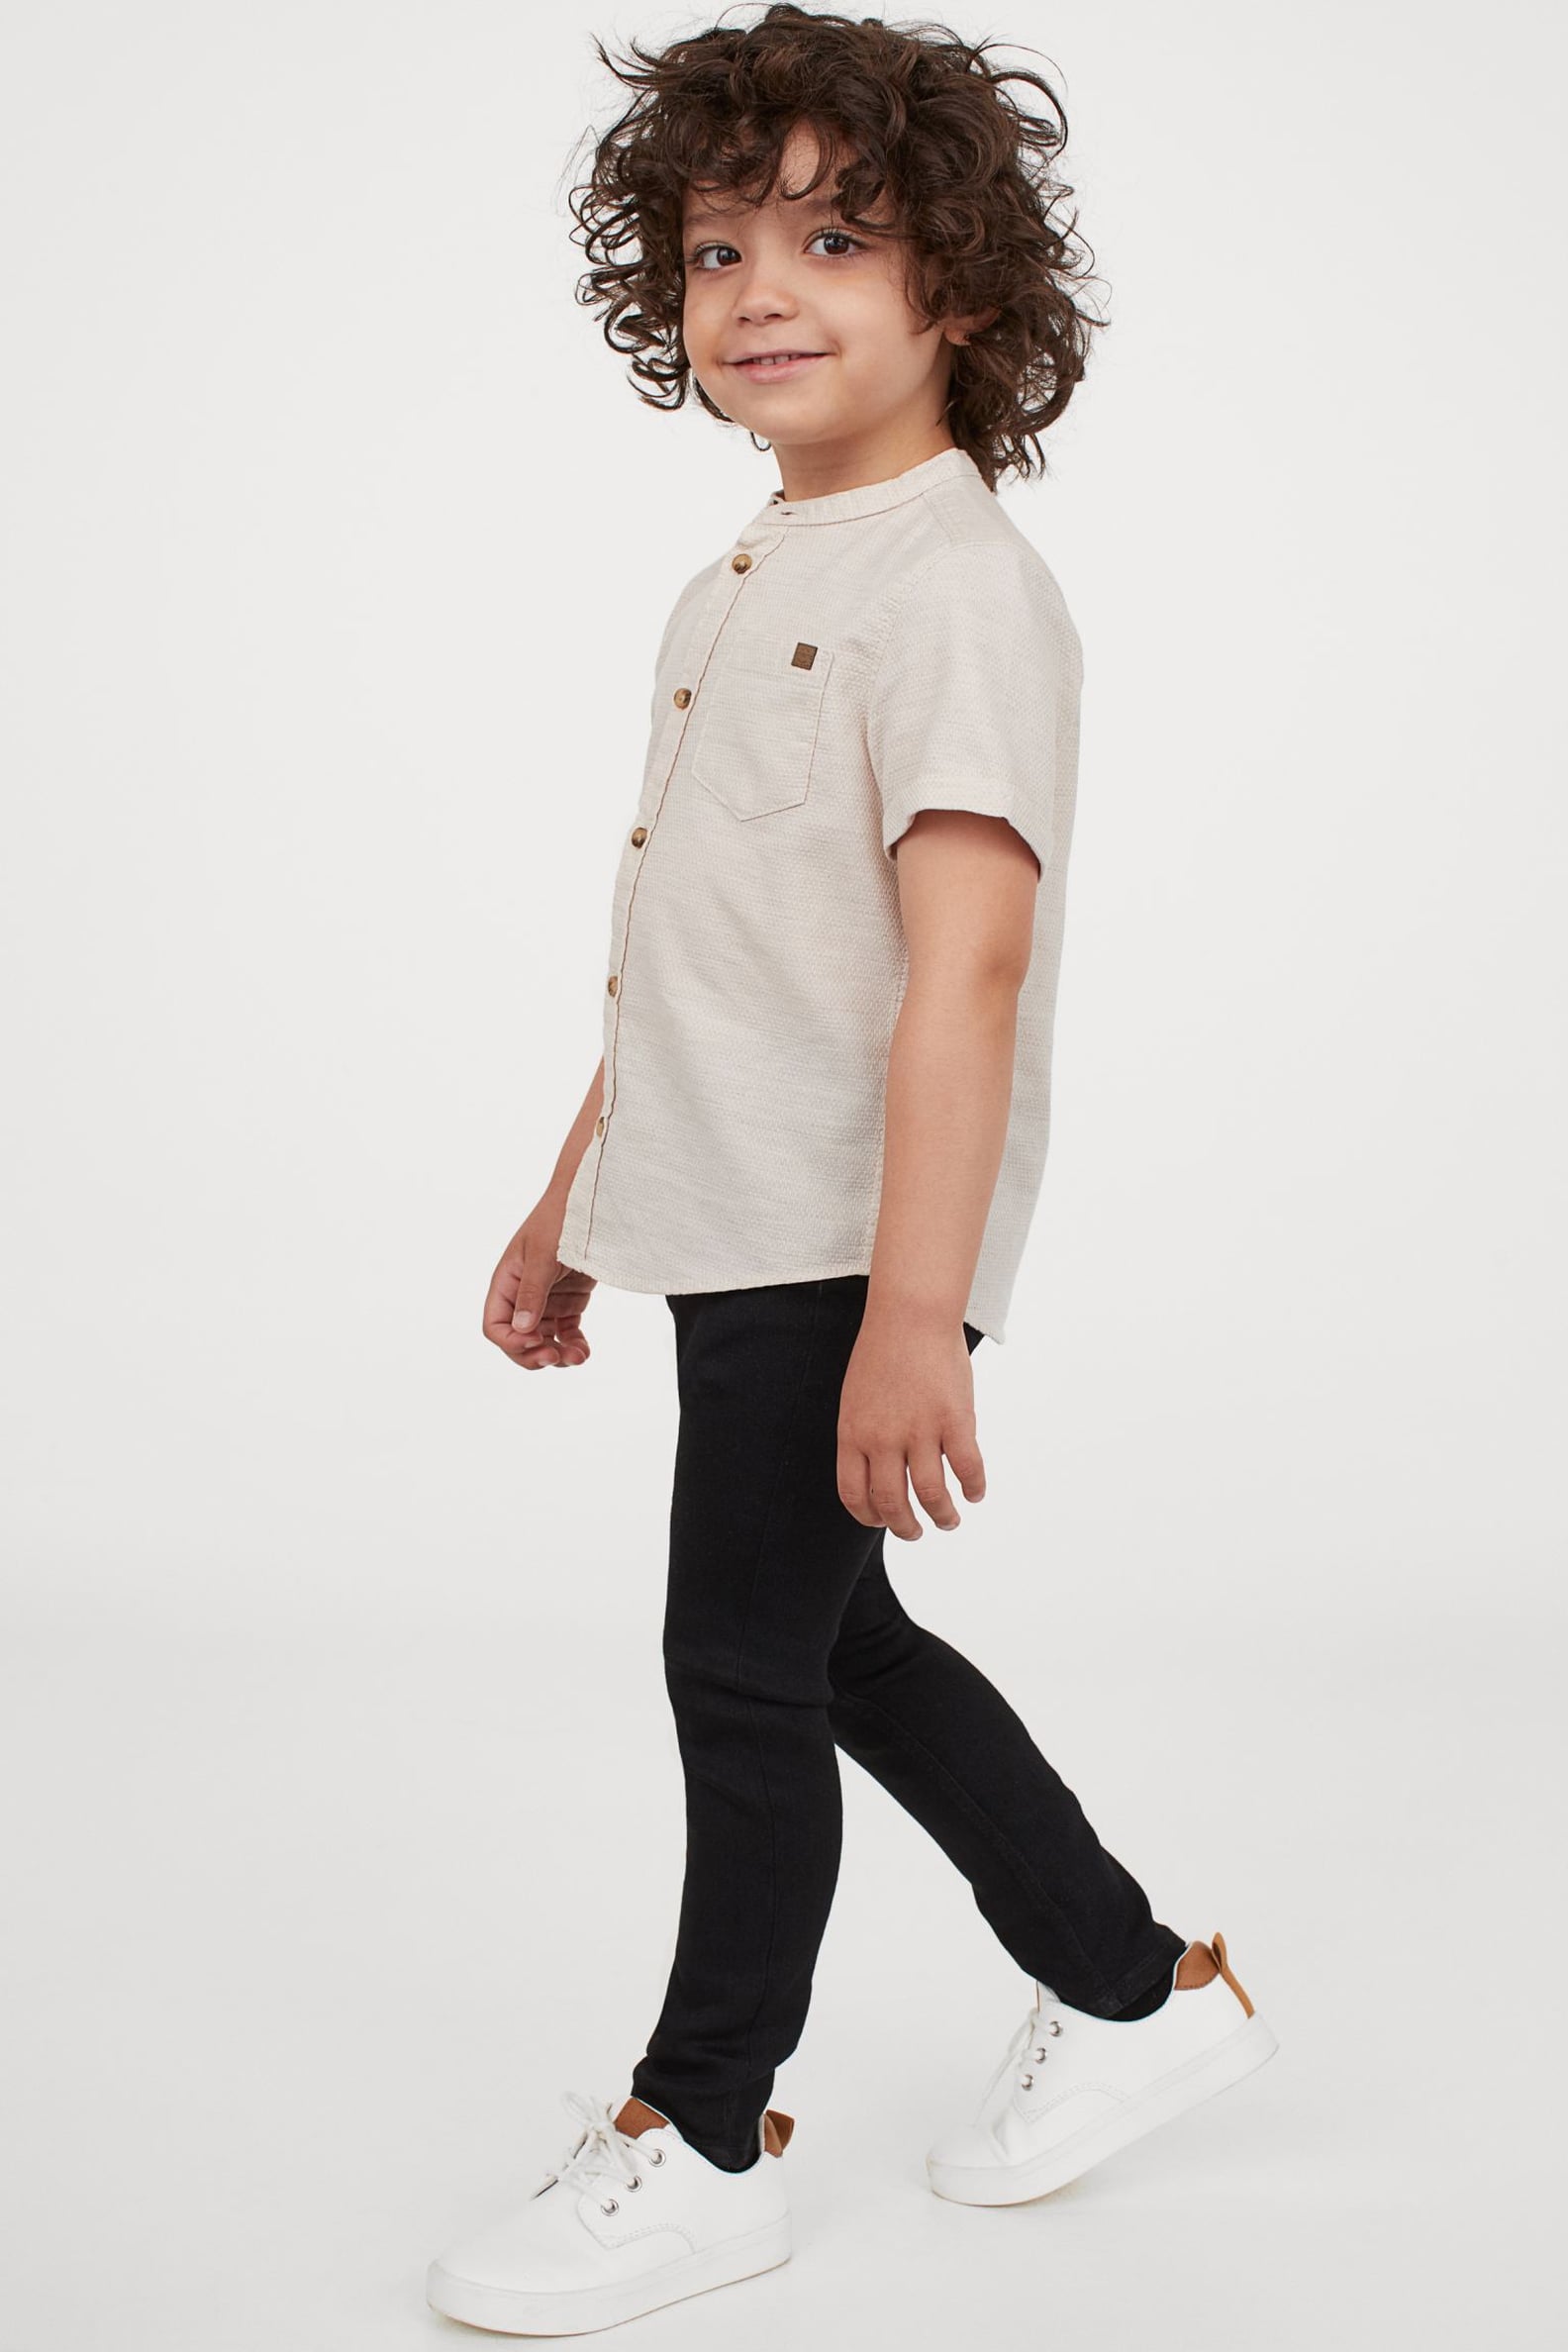 Affordable Pants Your Kid Can Wear With Everything | POPSUGAR Family